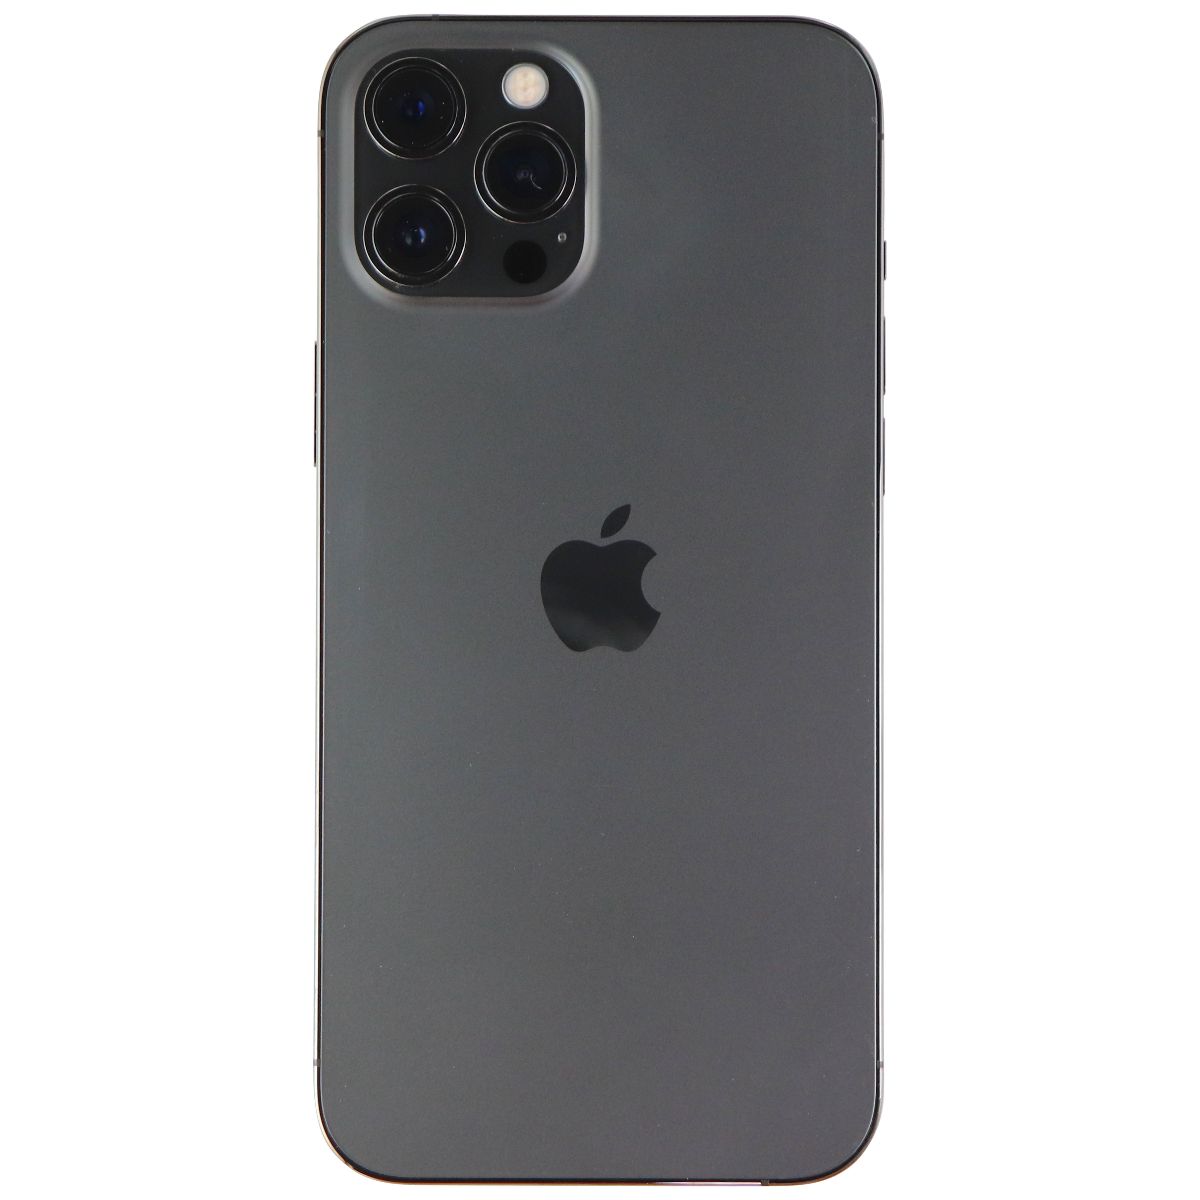 DEMO Apple iPhone 12 Pro (6.1-inch) A2341 (NO IMEI/NO CARRIER) - 128GB/Graphite Cell Phones & Smartphones Apple    - Simple Cell Bulk Wholesale Pricing - USA Seller